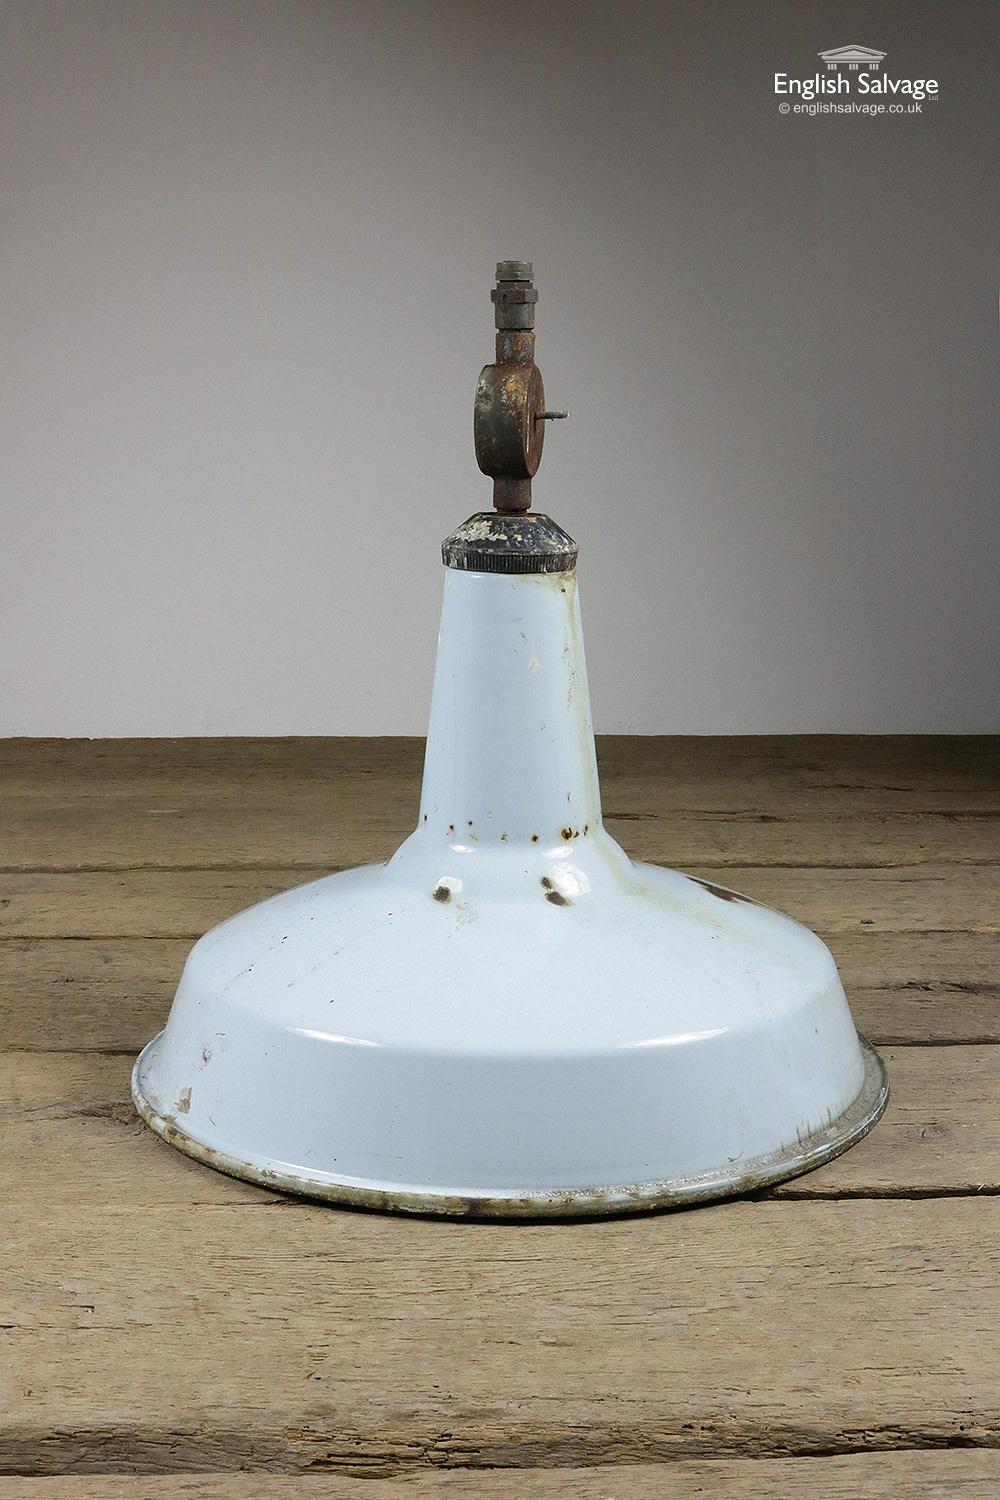 Reclaimed vintage industrial enamel pendant light which needs rewiring. Several spots of rust on the inside and outside of the shade. 

All electrical work/installation must be undertaken by a qualified electrician.